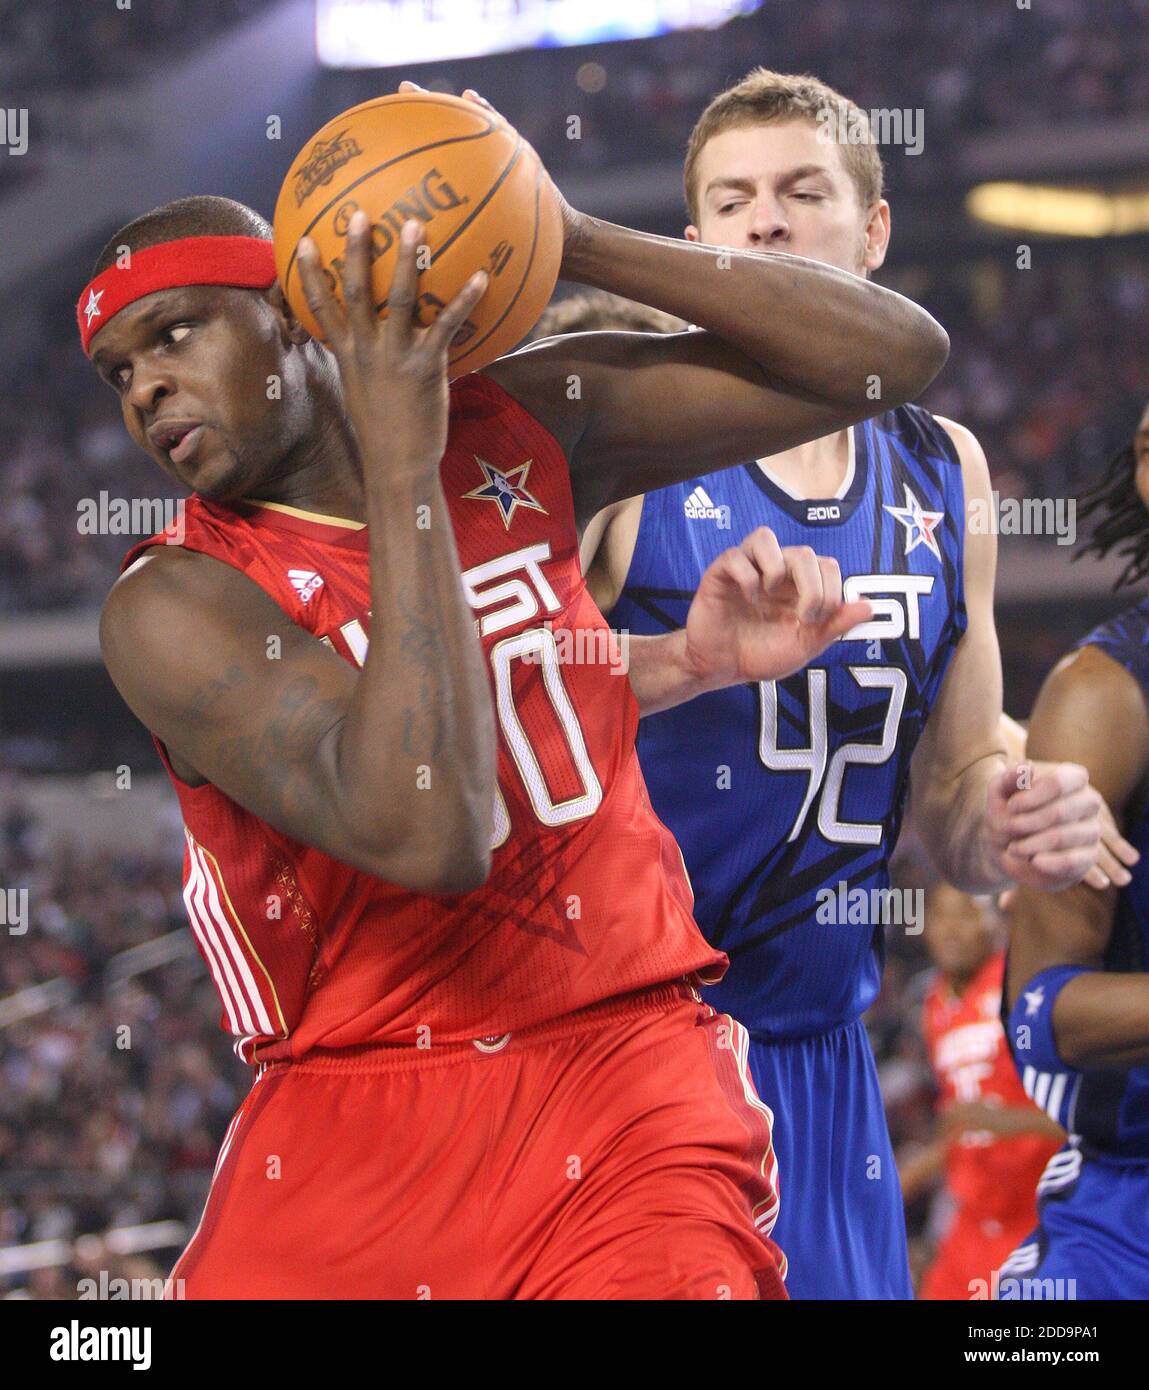 NO FILM, NO VIDEO, NO TV, NO DOCUMENTARY - The West's Zach Randolph grabs a rebound in front of the East's David Lee during the NBA All-Star Game match at Cowboys Stadium in Arlington, in Texas, USA on February 14, 2010. East won 141-139. Photo by Ron T. Ennis/MCT/Cameleon/ABACAPRESS.COM Stock Photo